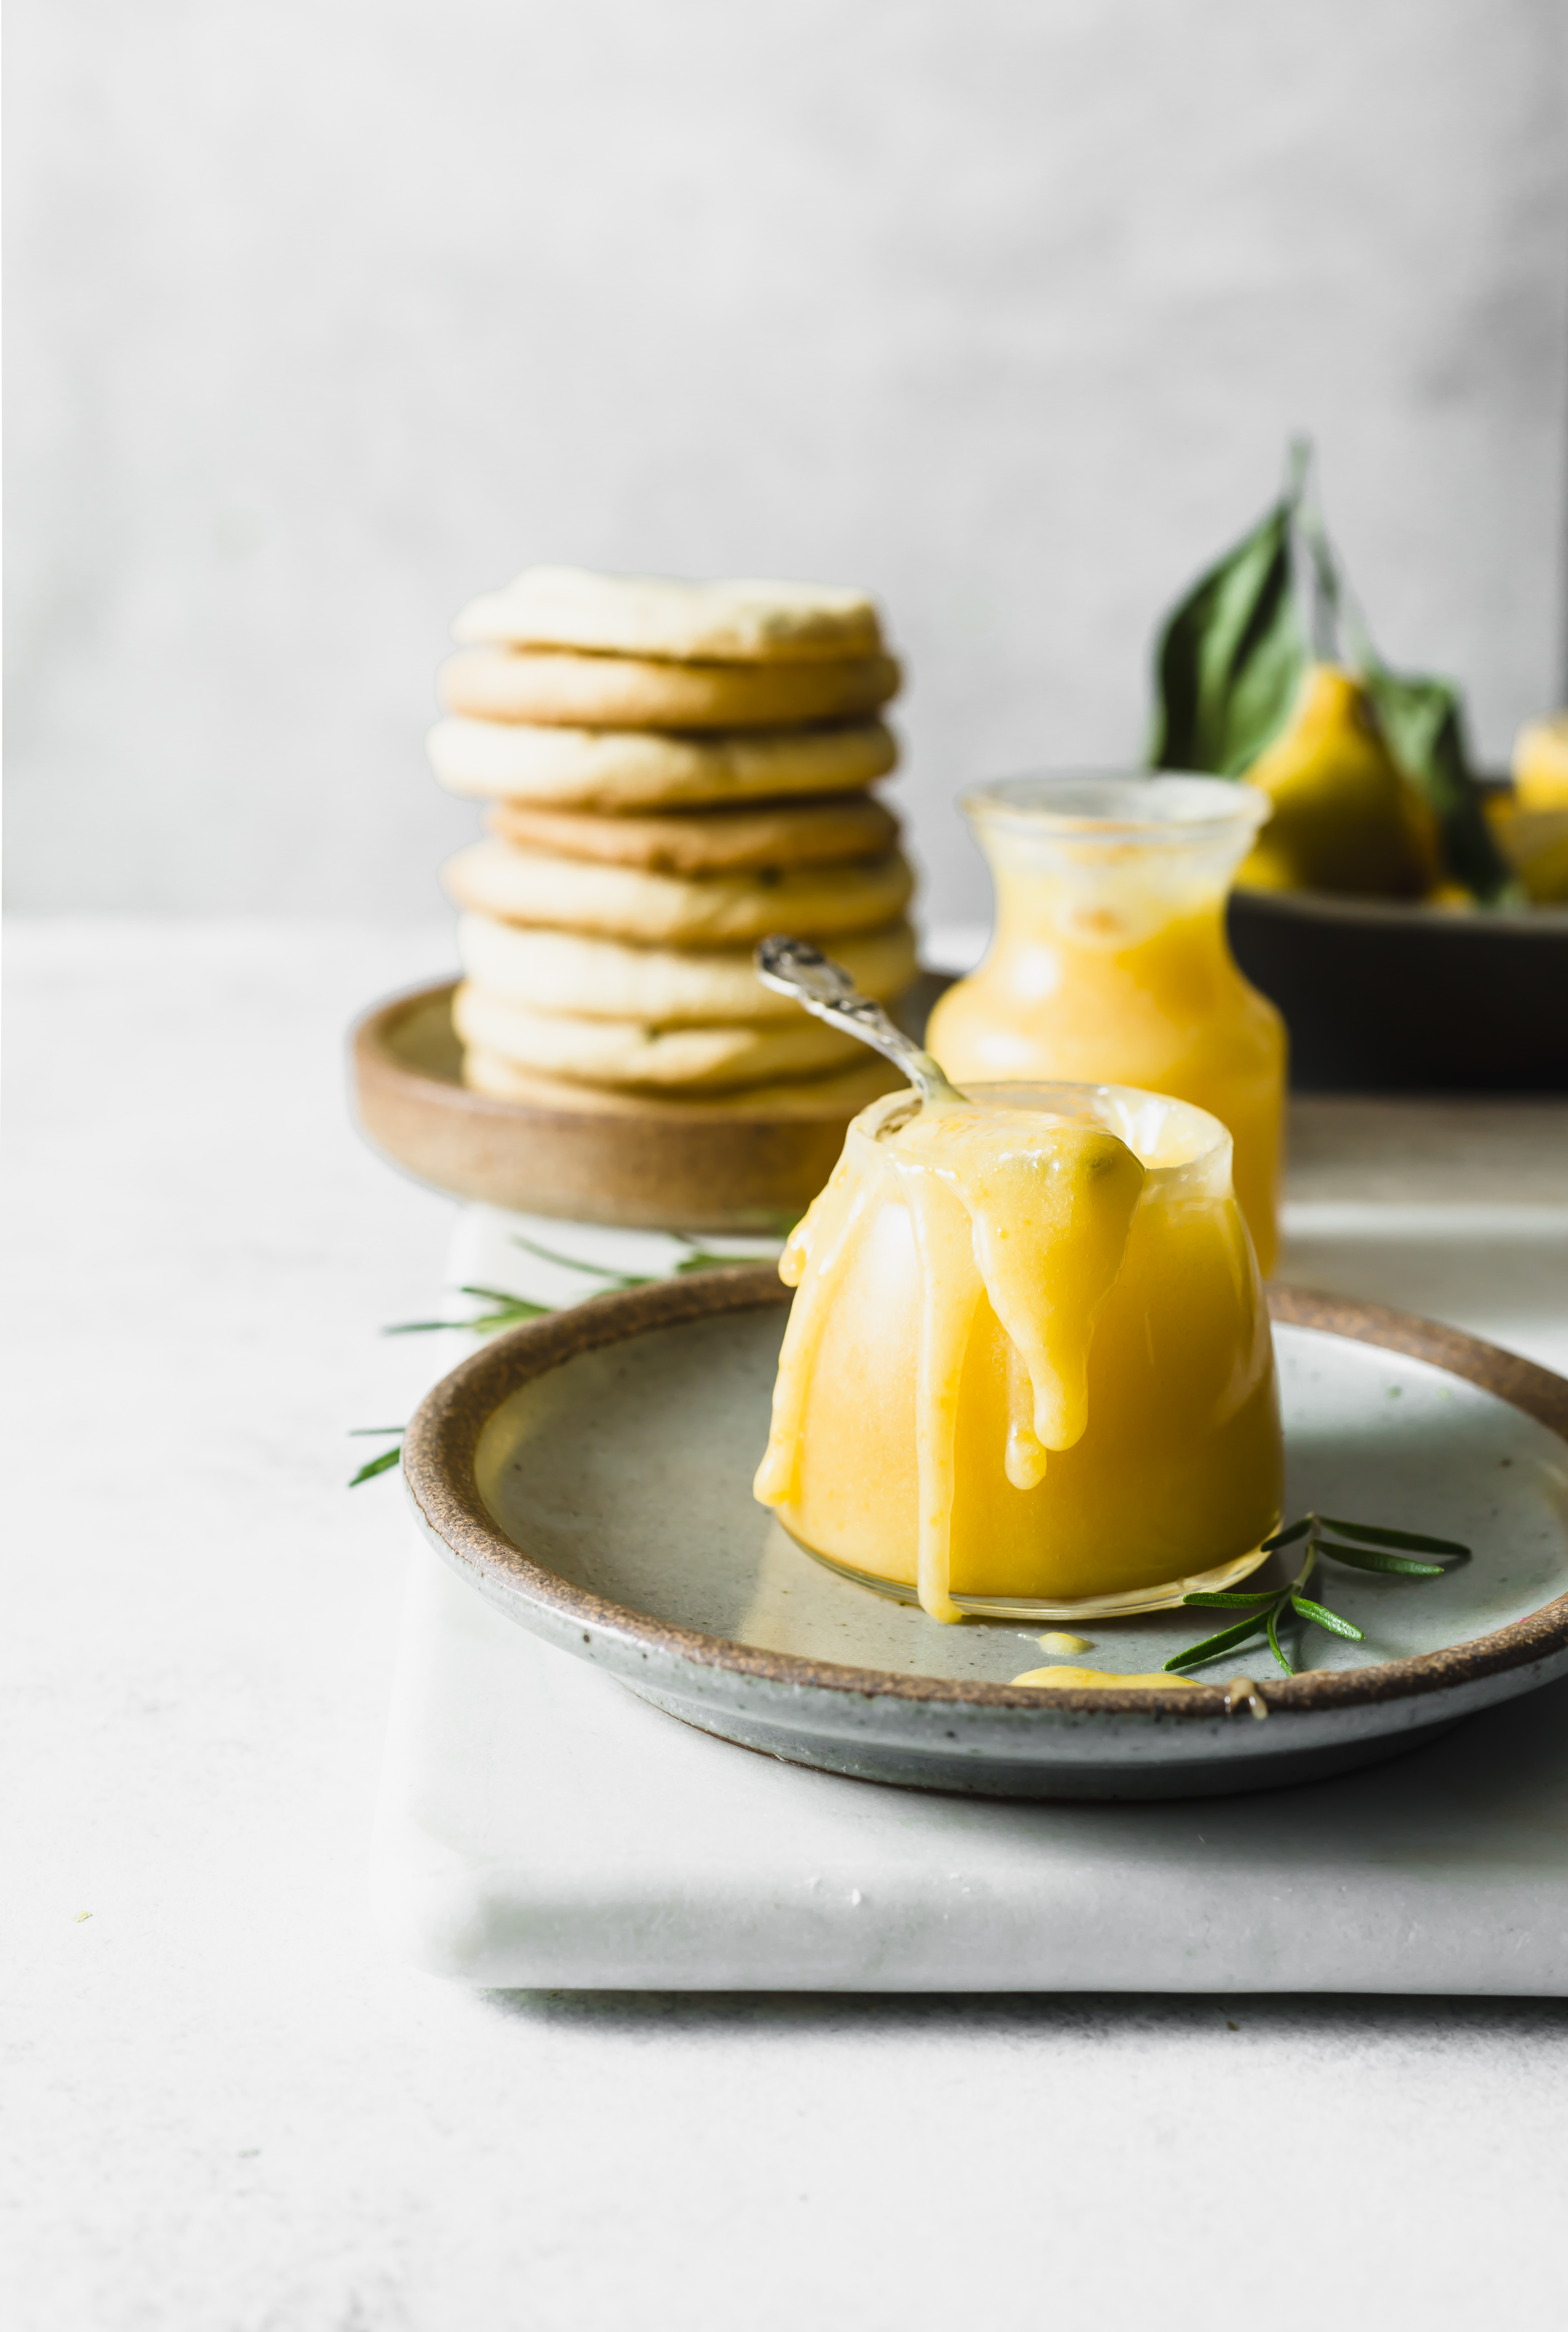 ROSEMARY SABLES WITH LEMON CURD